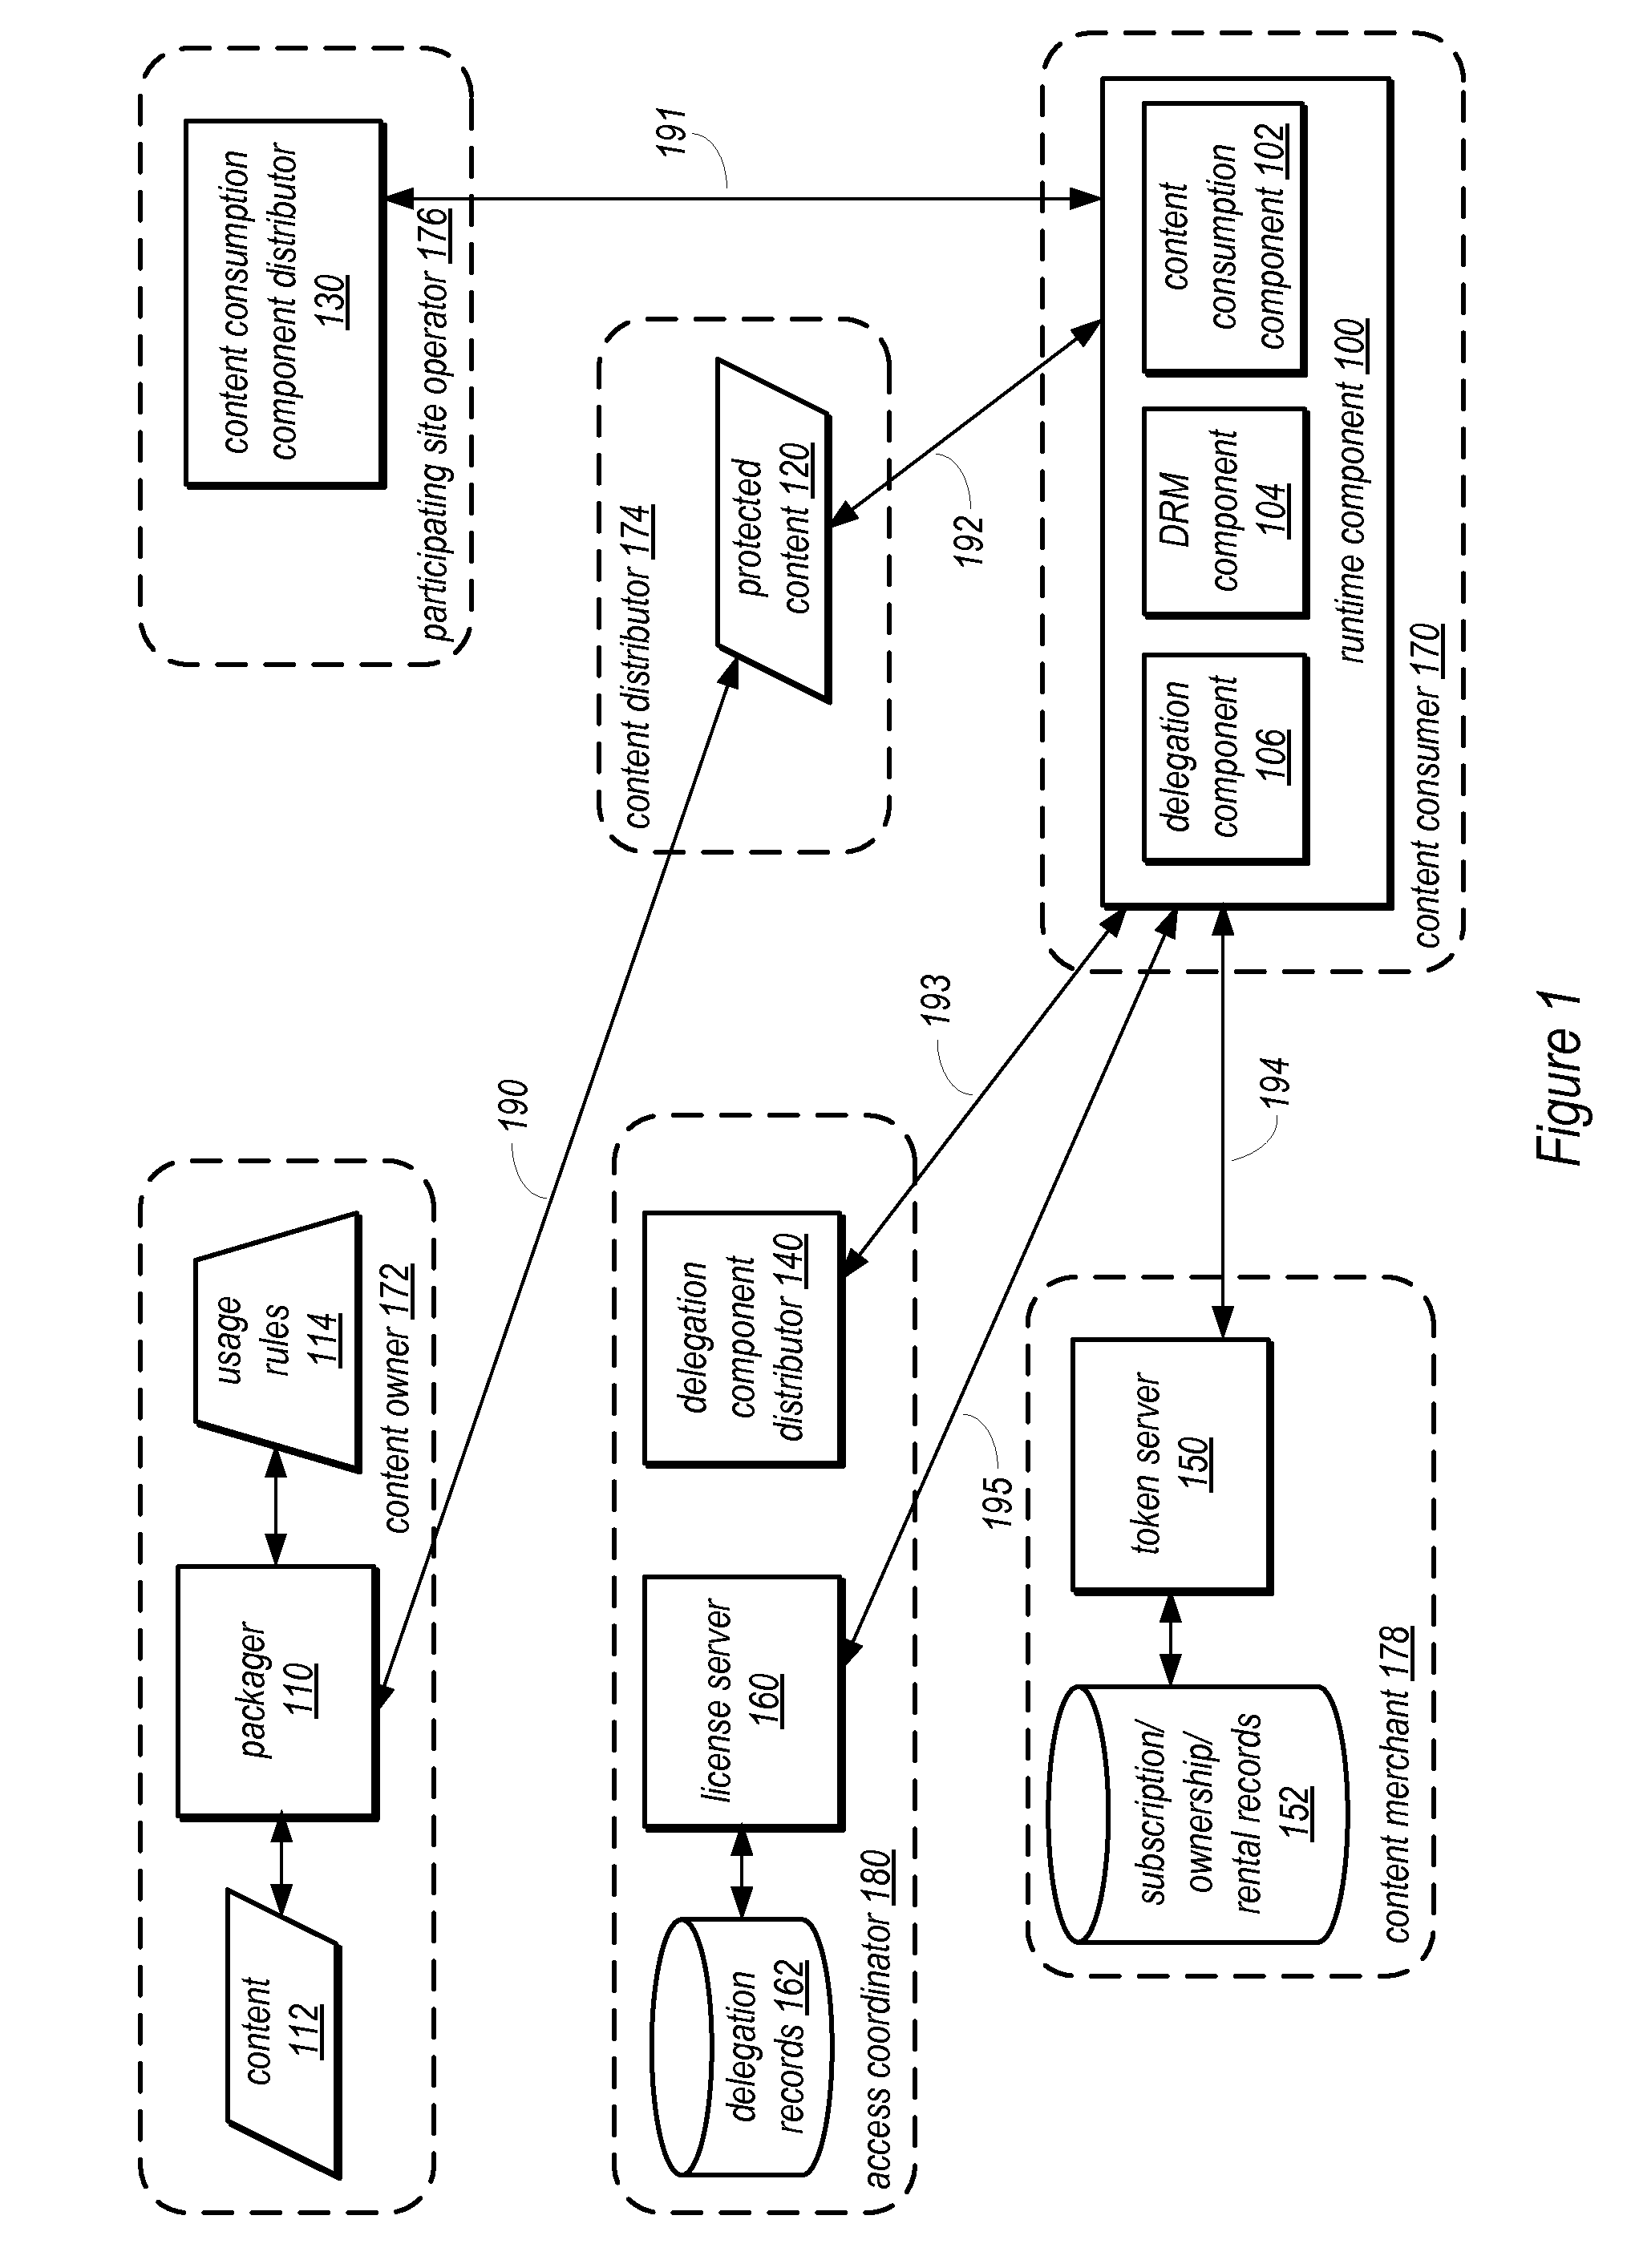 System And Method For Digital Rights Management With Delegated Authorization For Content Access